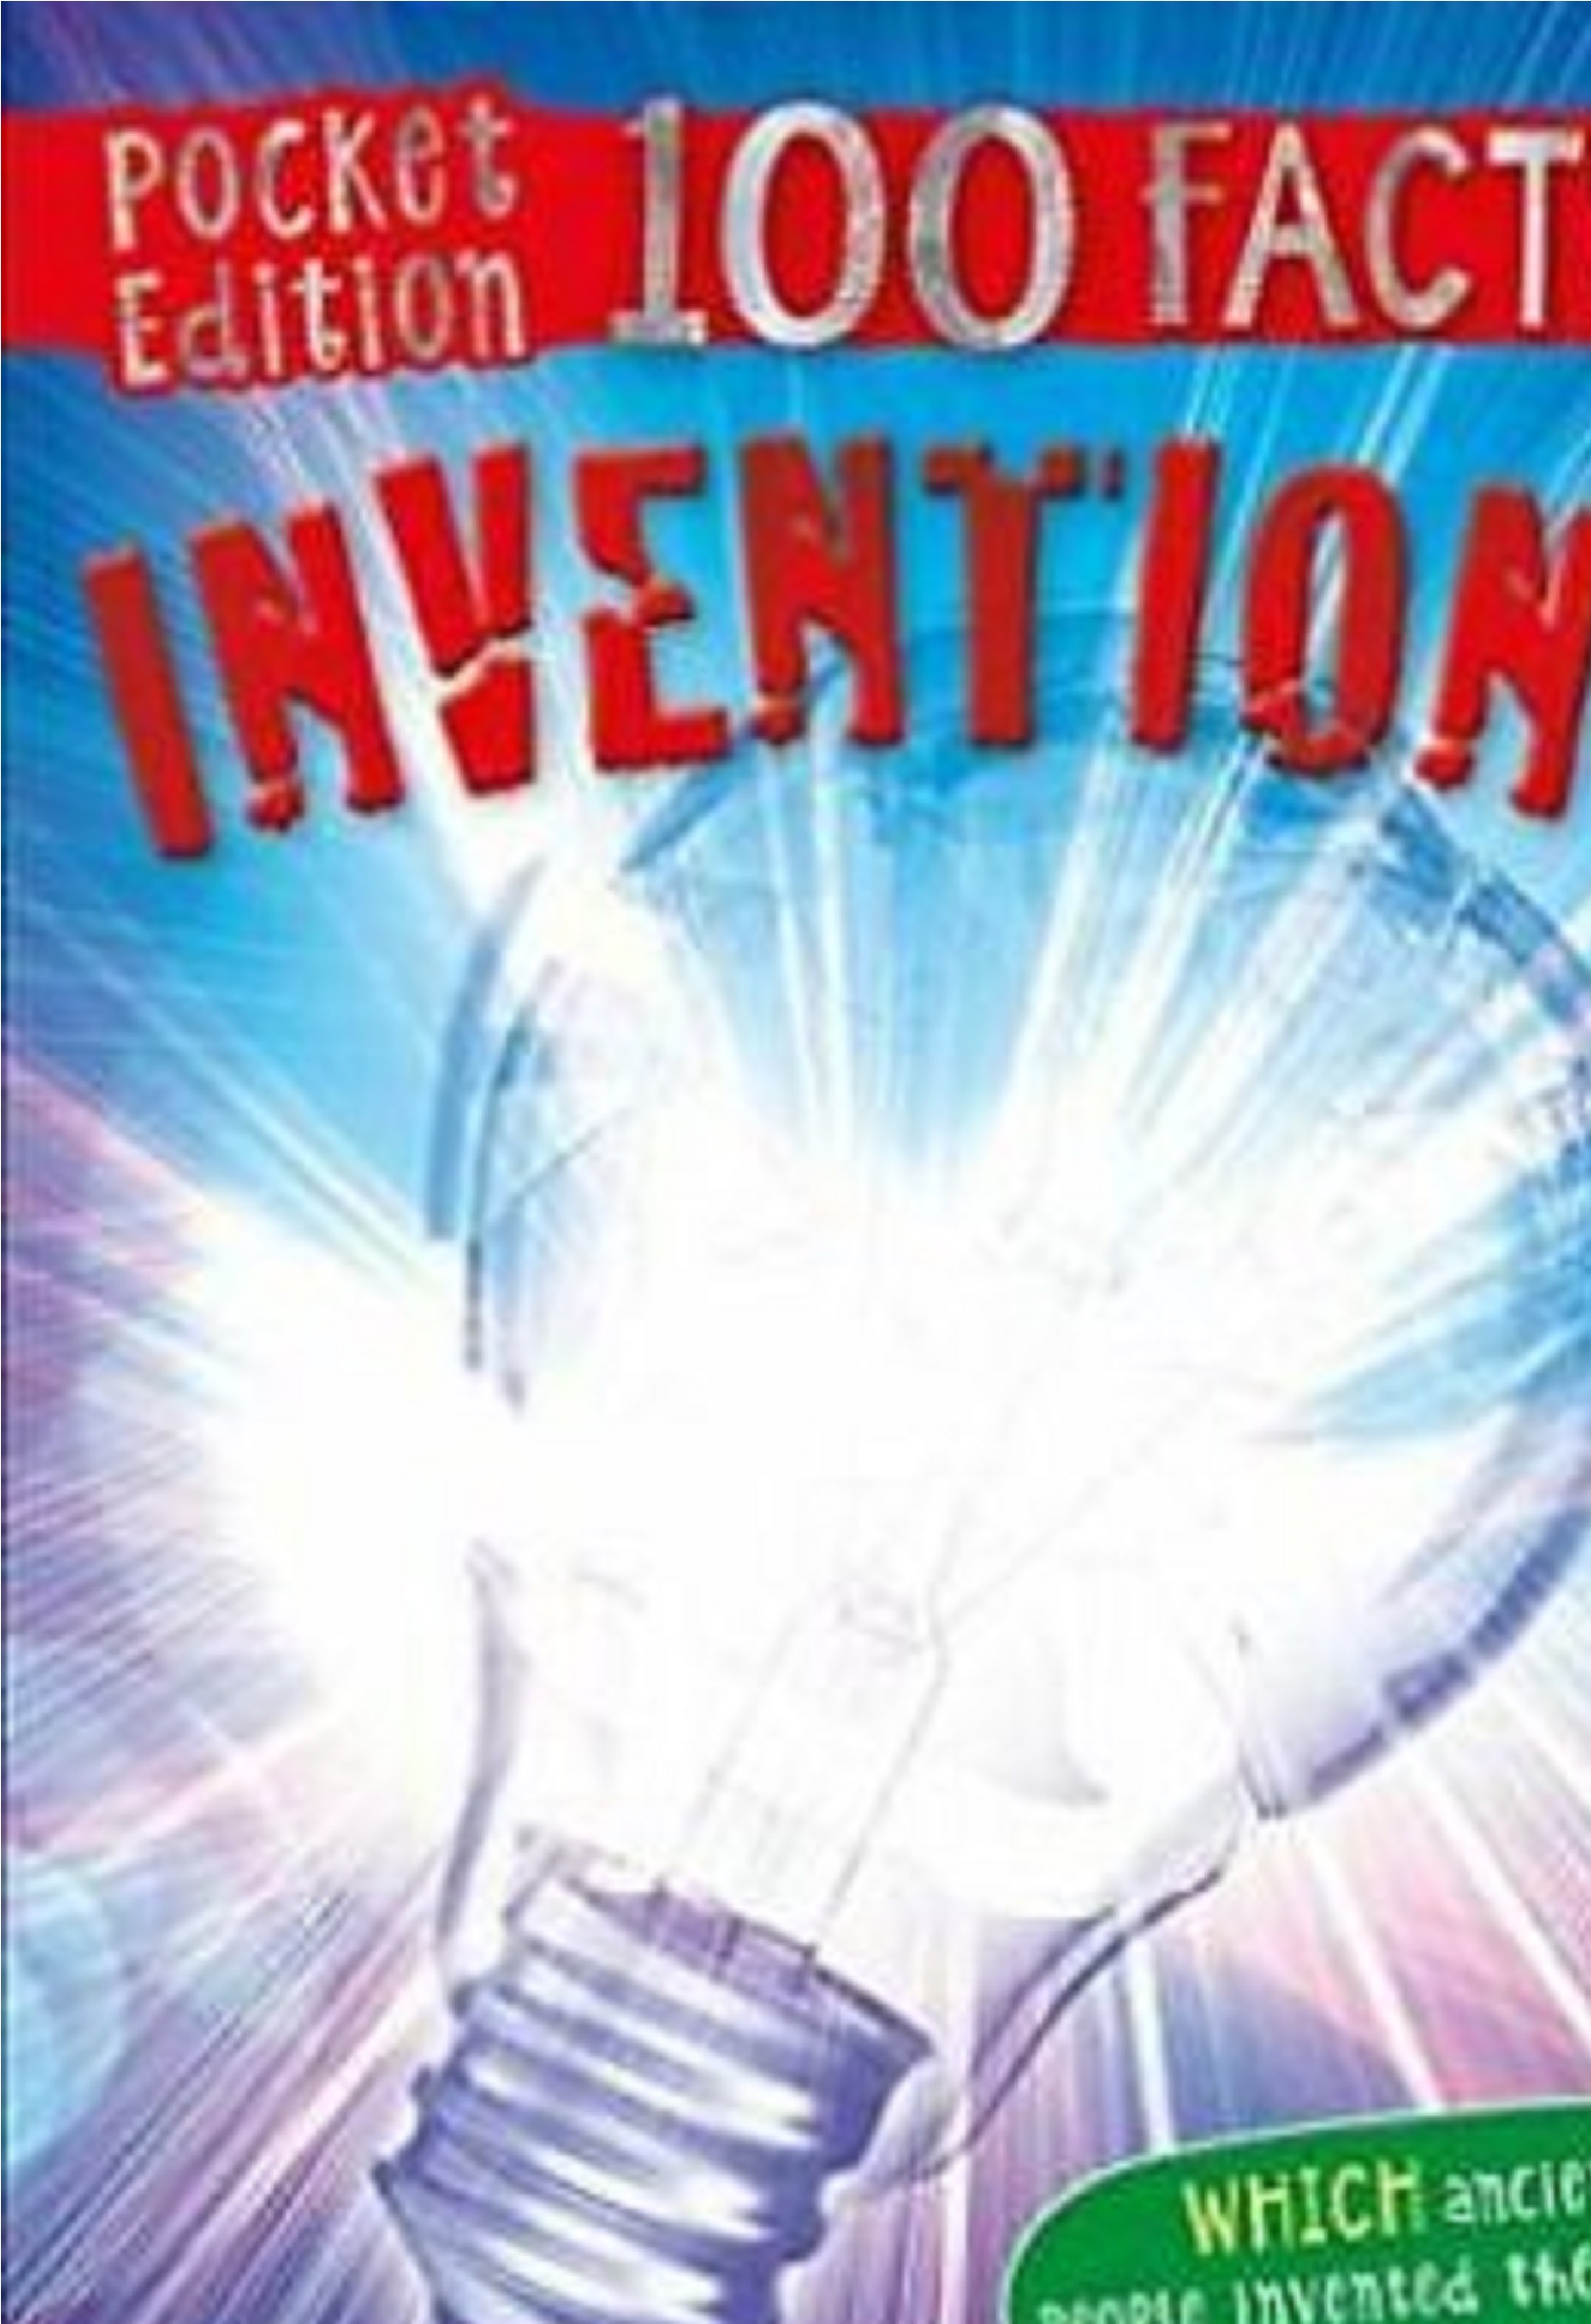 100 FACTS INVENTIONS POCKET EDITION